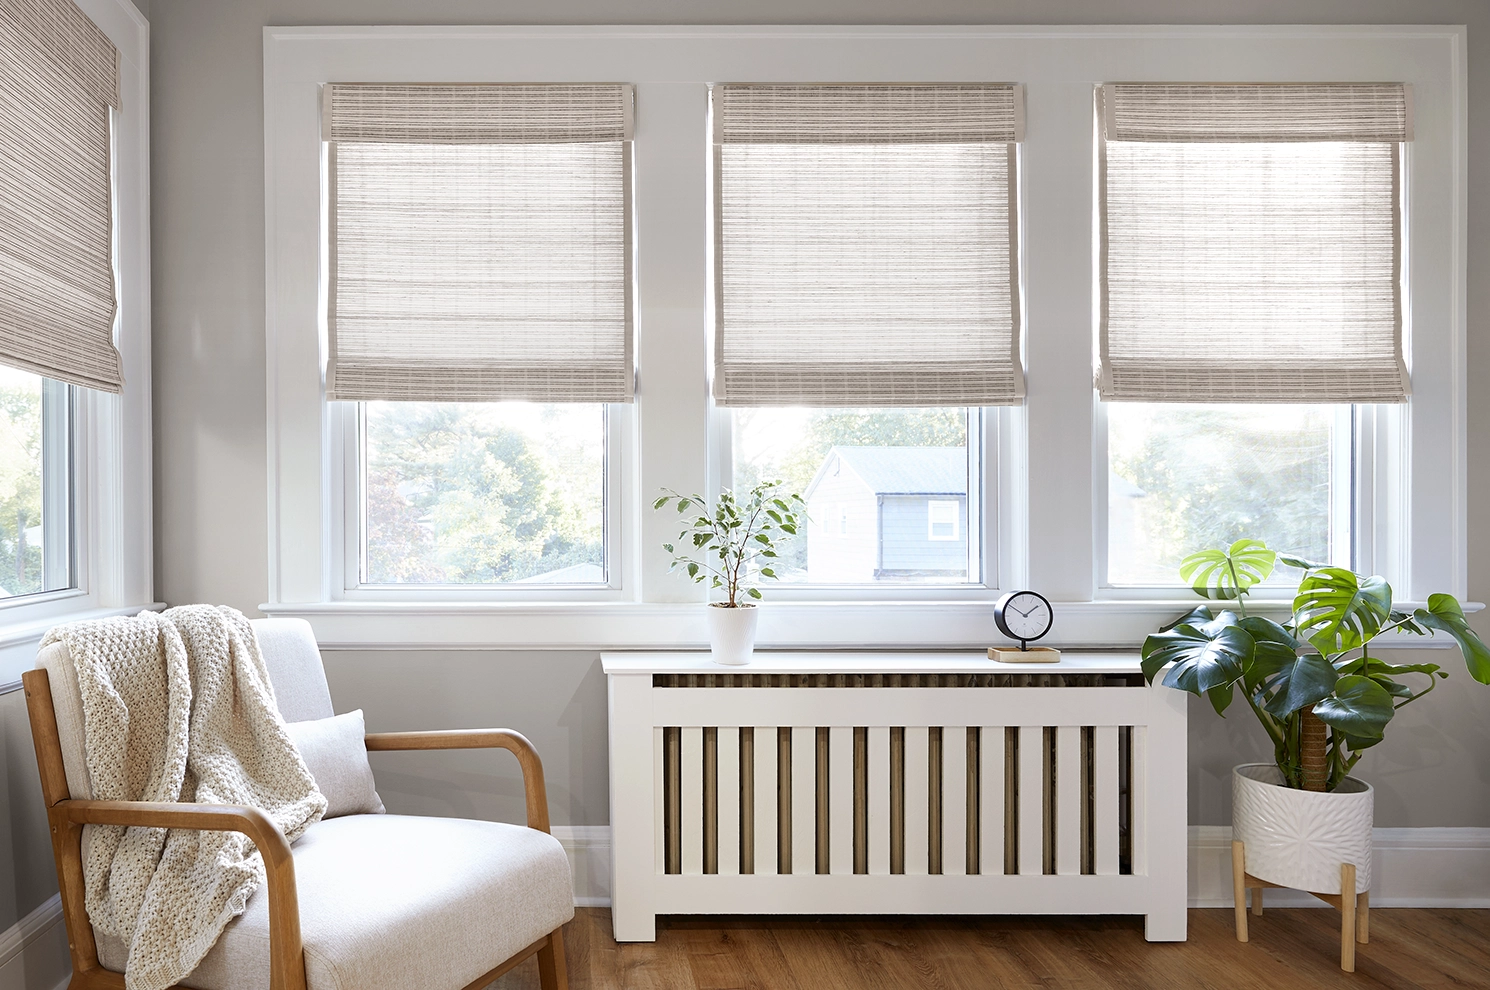 Woven wood shades allow light to pour into a modern sitting room.